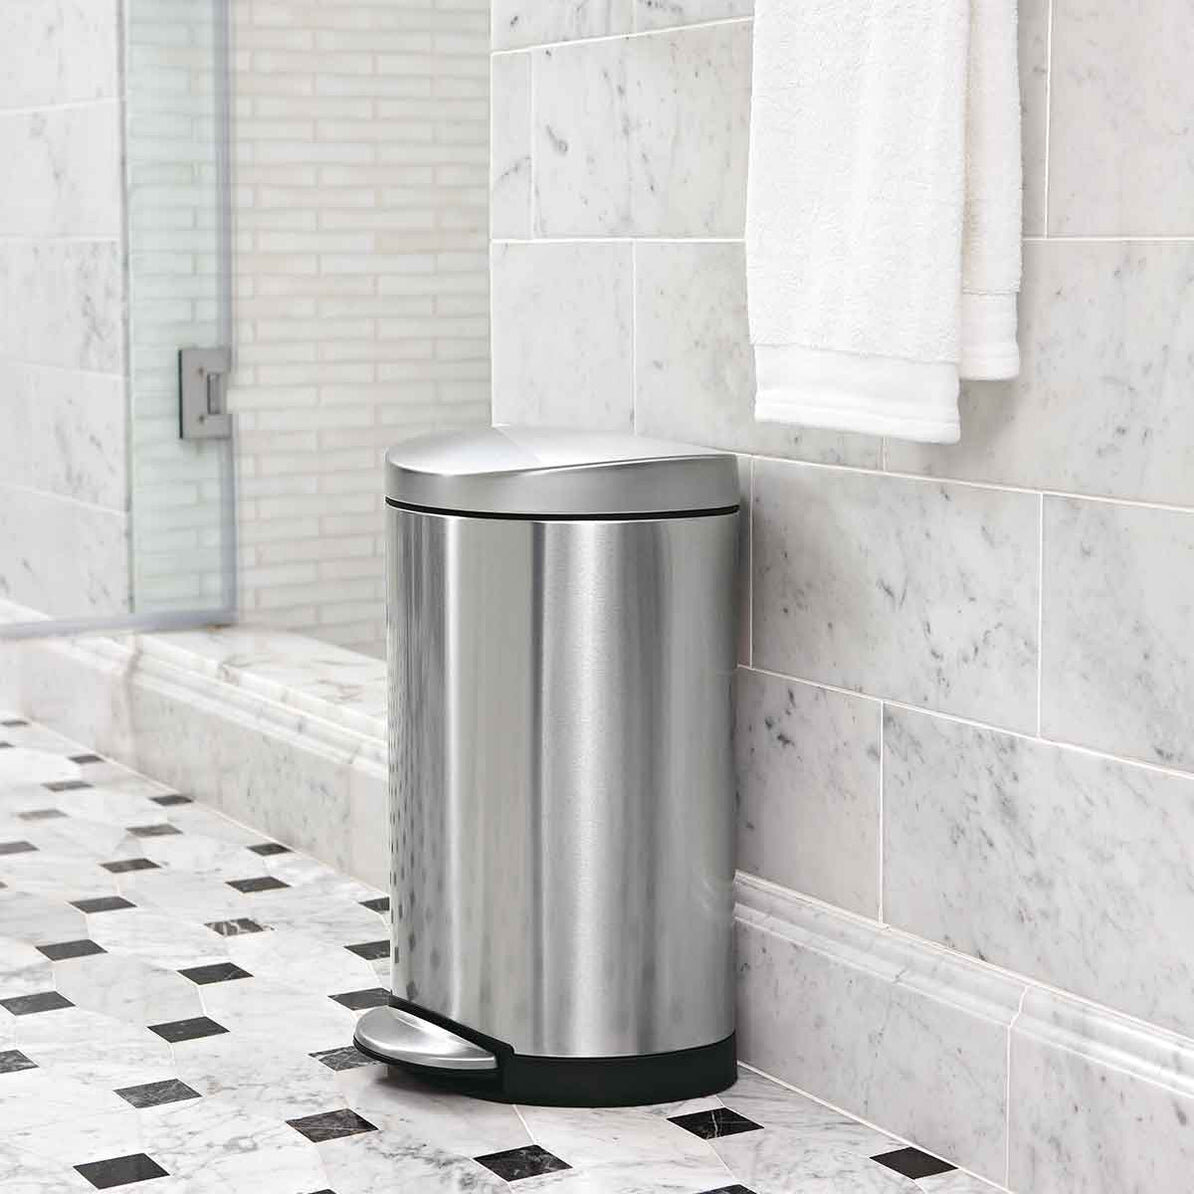 Simplehuman 10 Liter / 2.3 Gallon Small Semi-Round Bathroom Step Trash Can,  Brushed Stainless Steel & Reviews